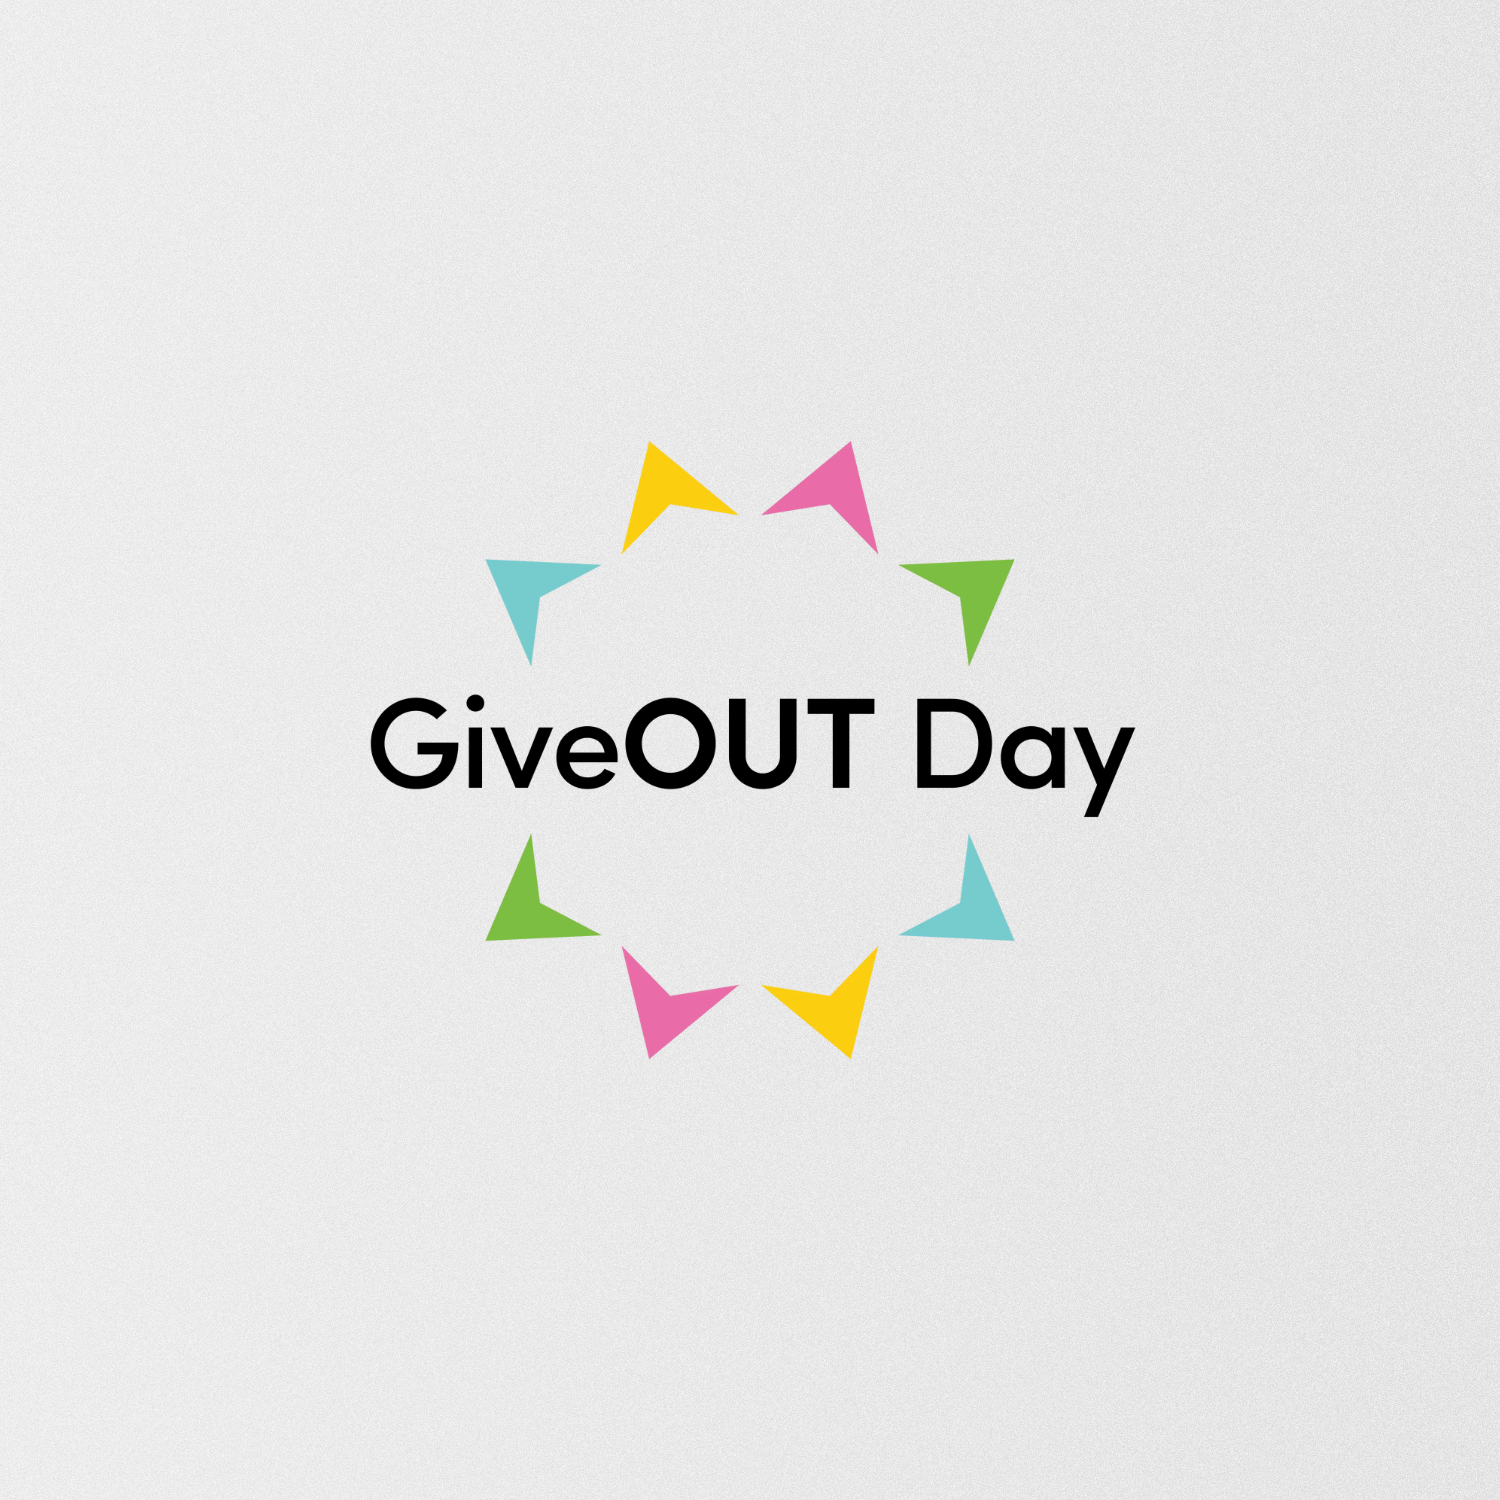 Why is GiveOUT Day so important?